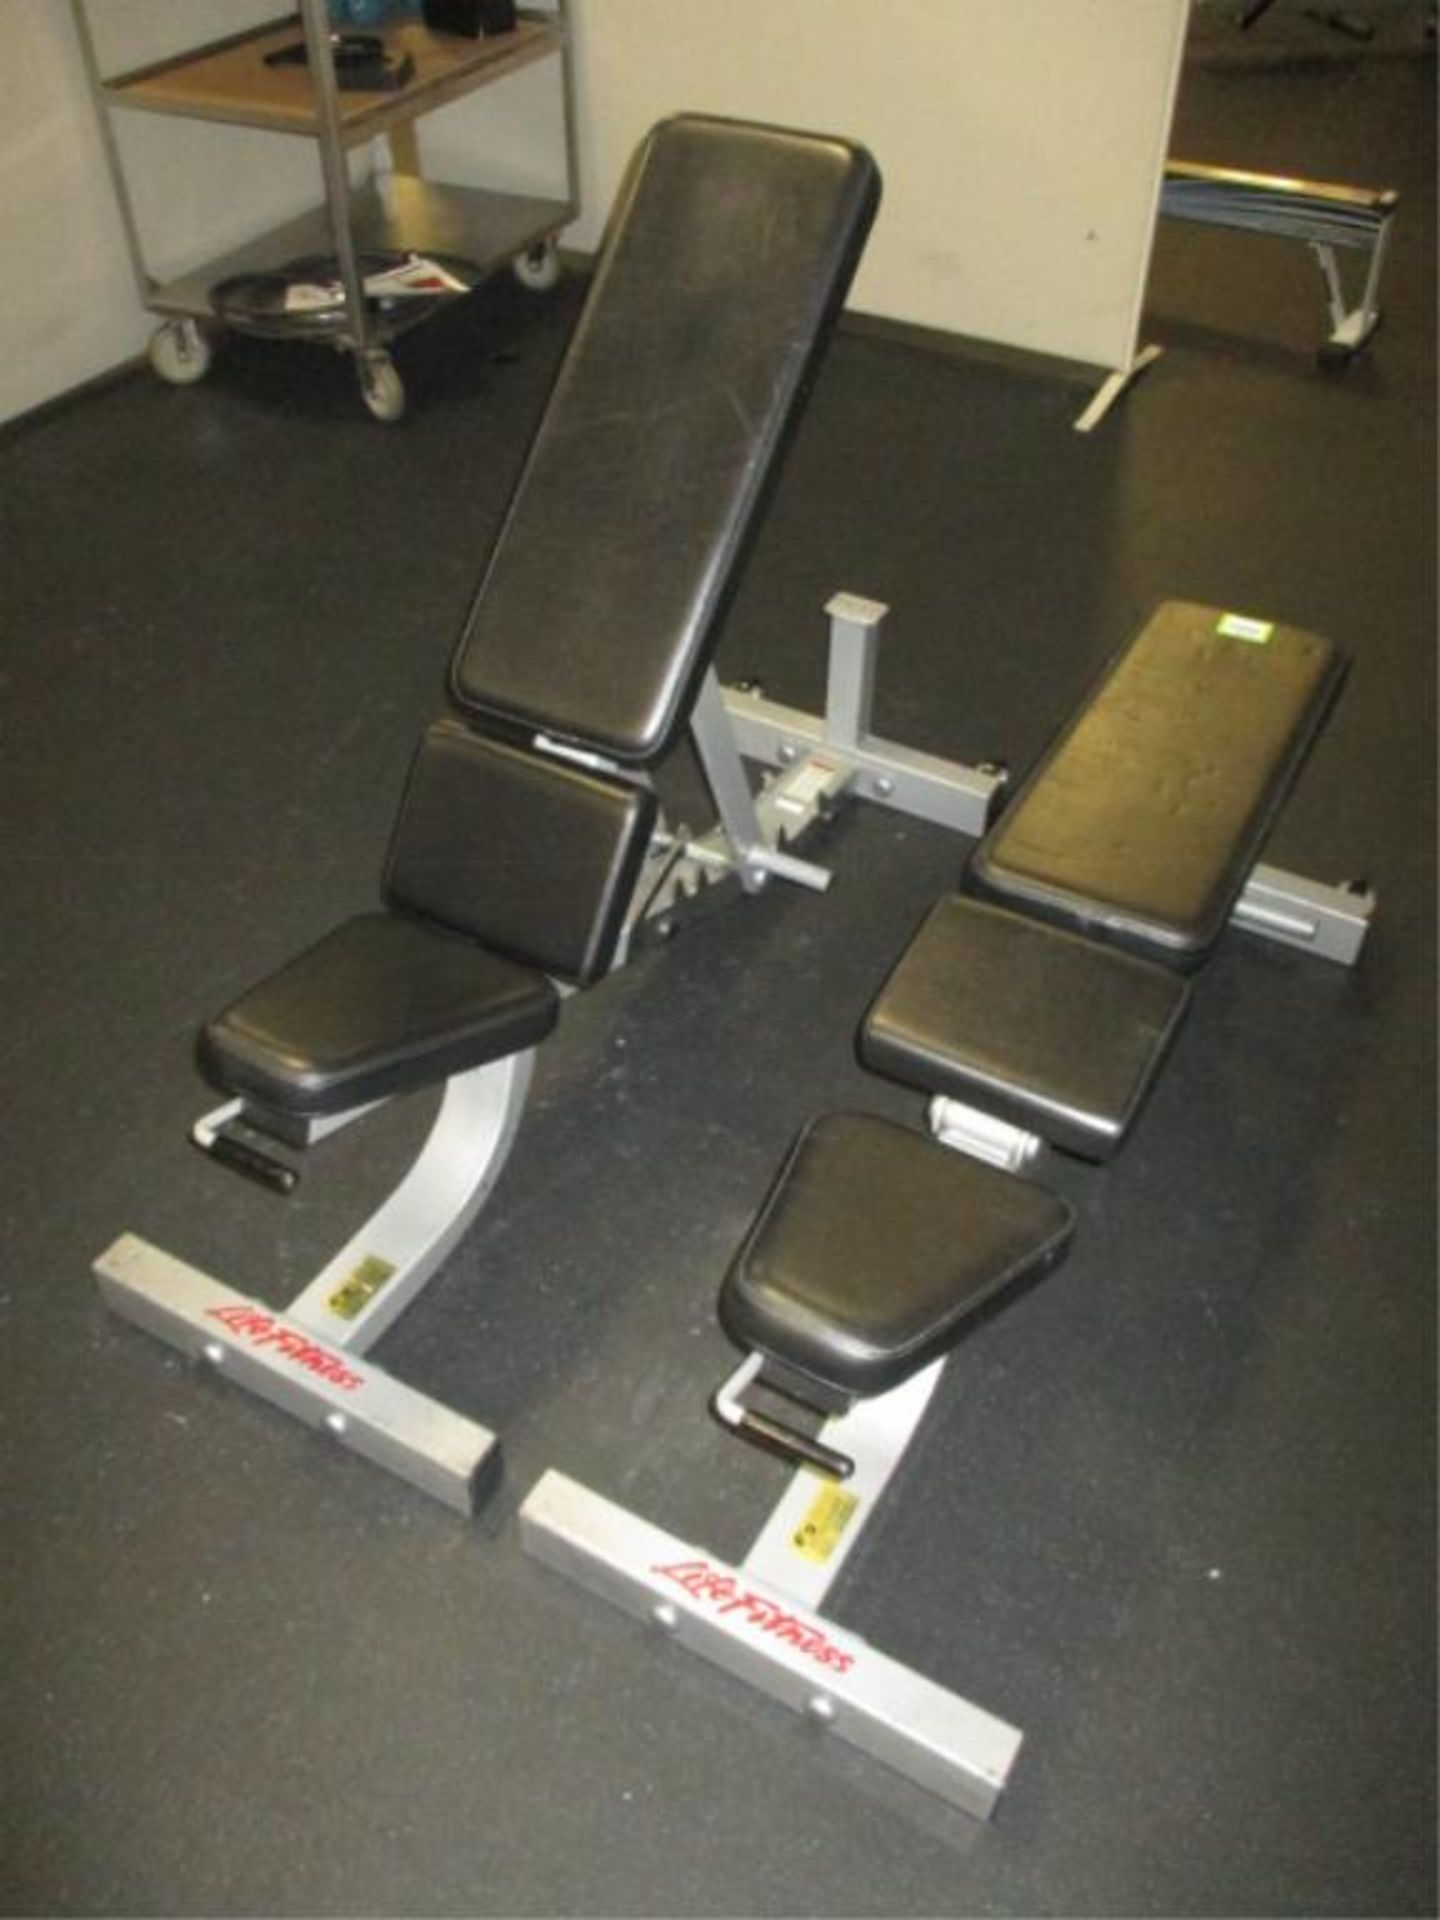 Life Fitness CSAJB-1007-102 Workout Bench; Freeweight and Selectorized Adjustable Workout Bench.